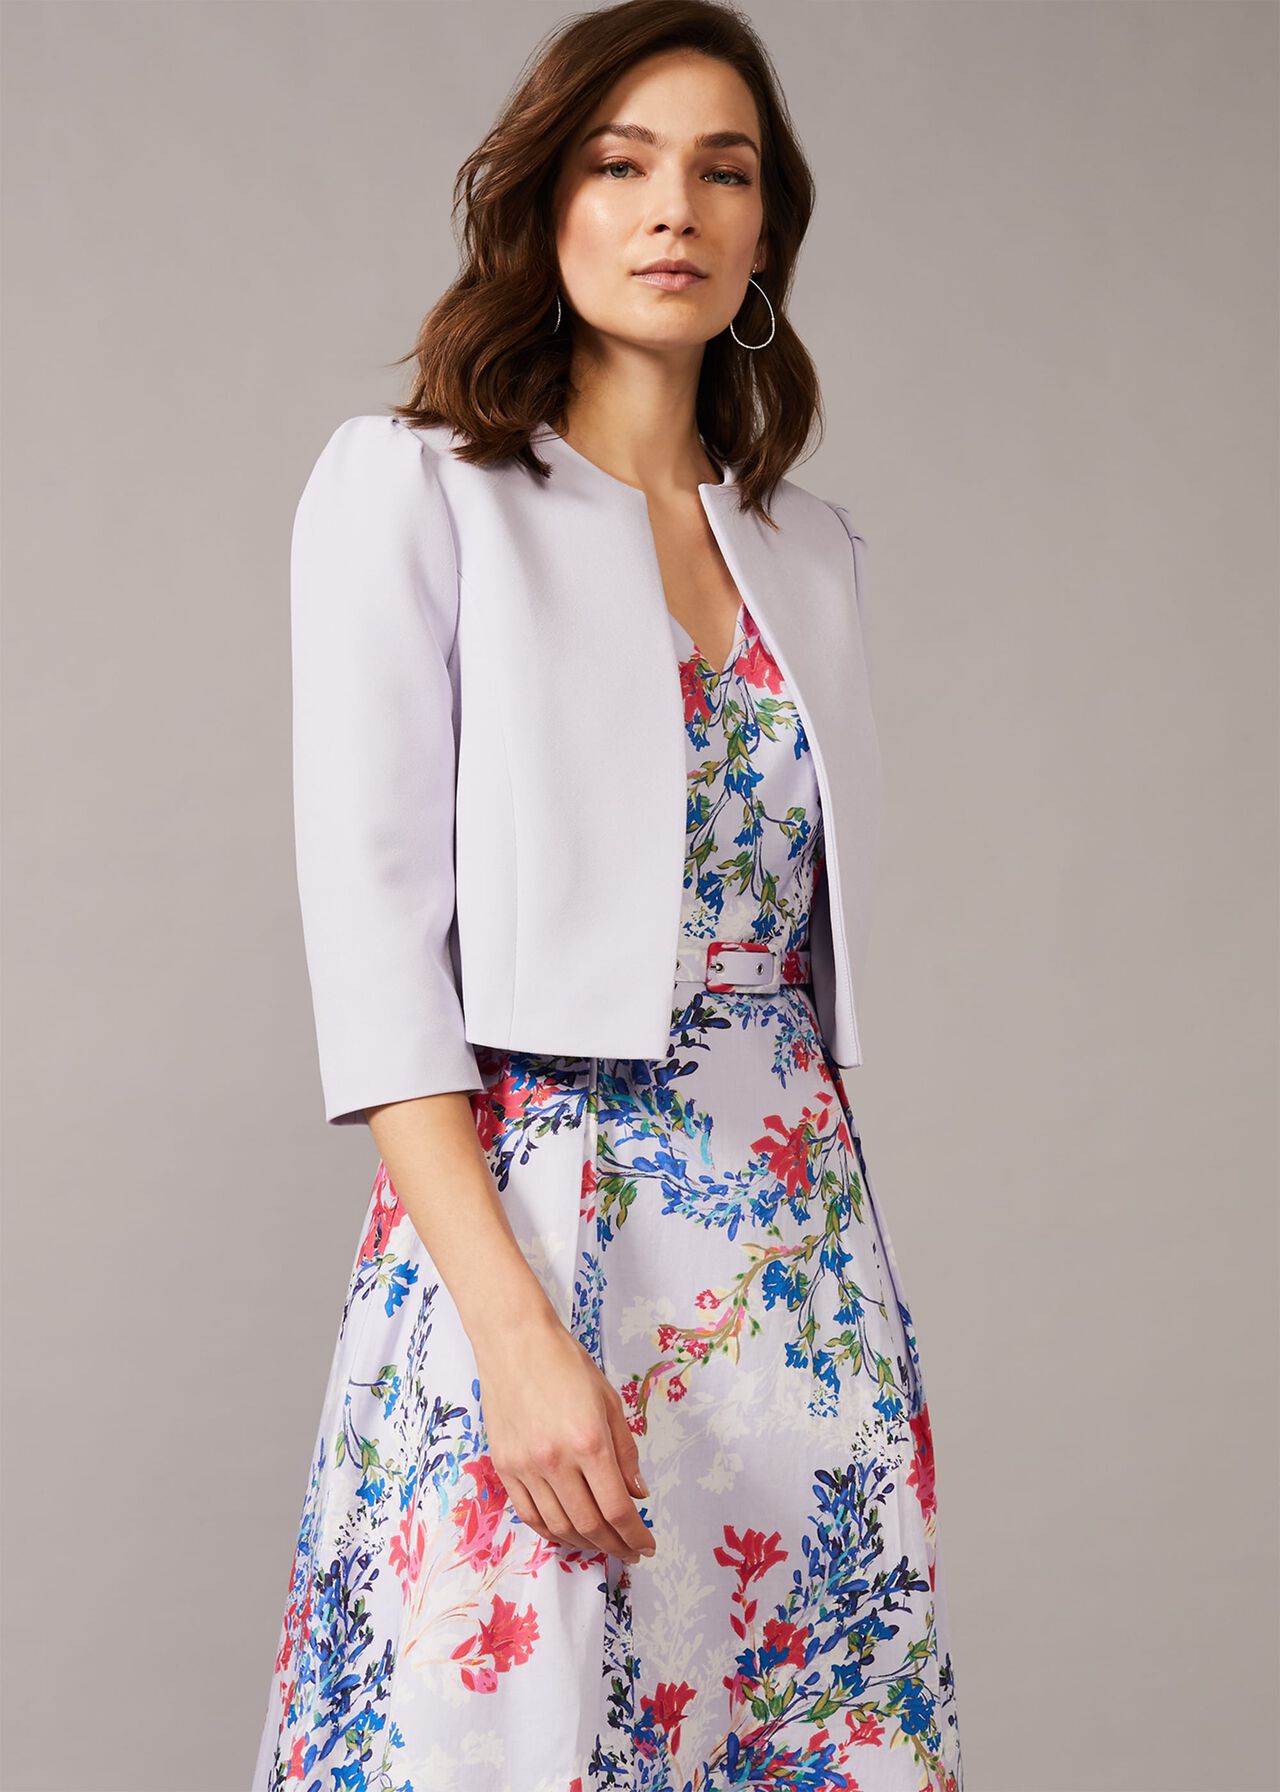 Venitia Cropped Occasion Jacket